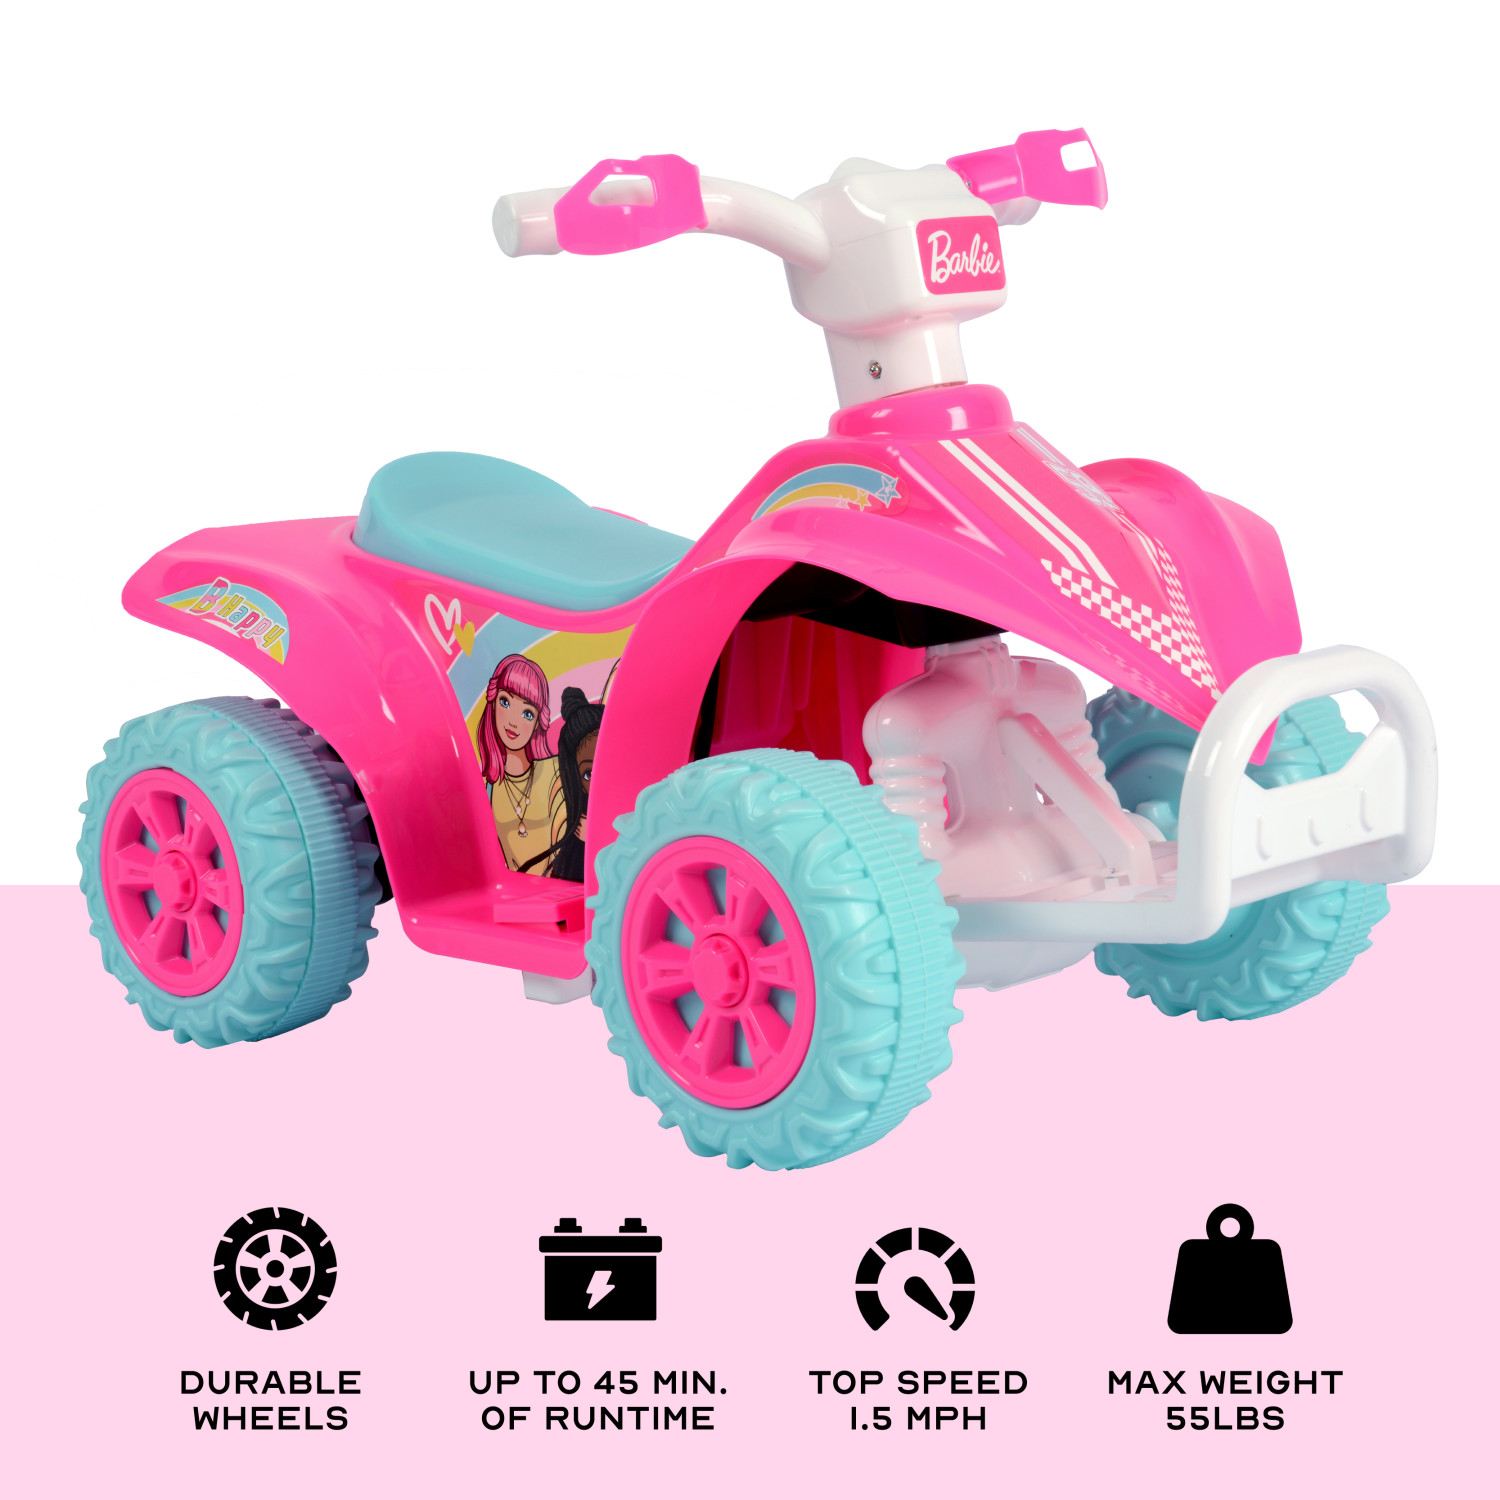 Licensed Barbie 6V Battery Powered Ride on ATV for Kids Ages 2-5 Years Old, Pink - image 3 of 13